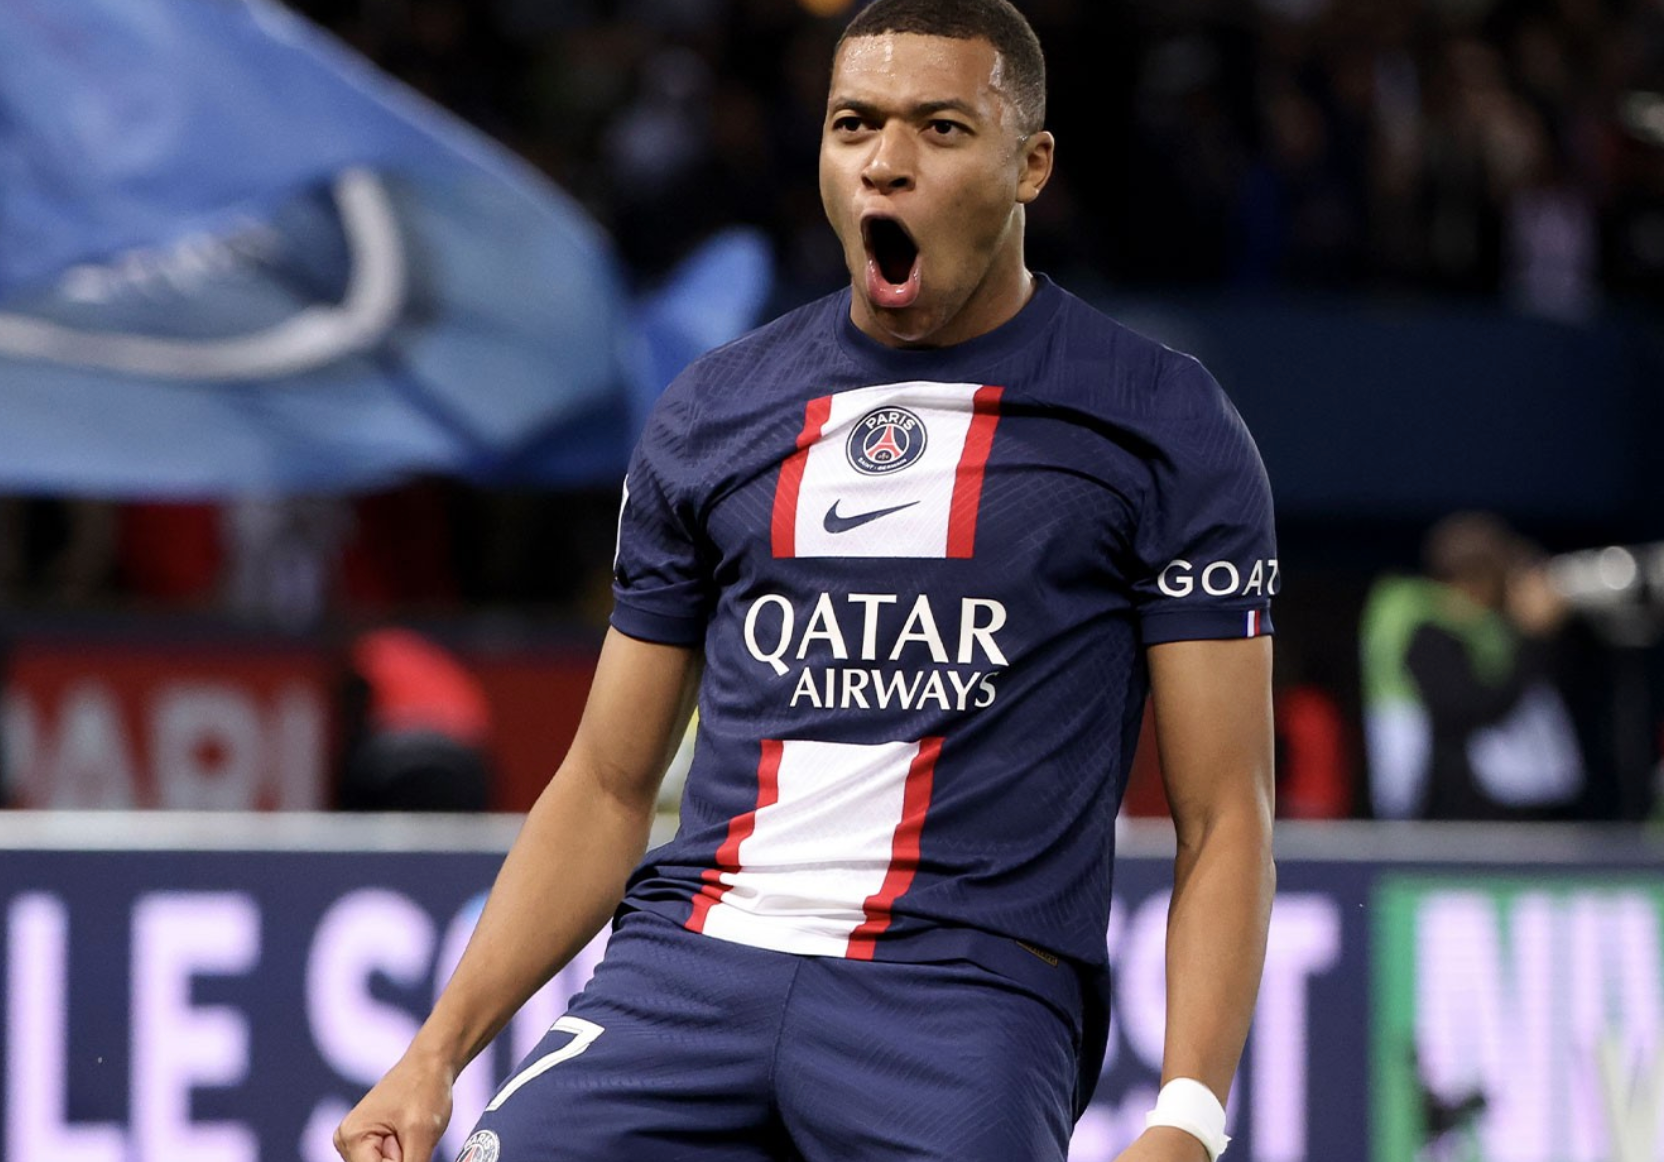 Kylian Mbappé Tops Forbes Highest-Paid Soccer Player List for 2022